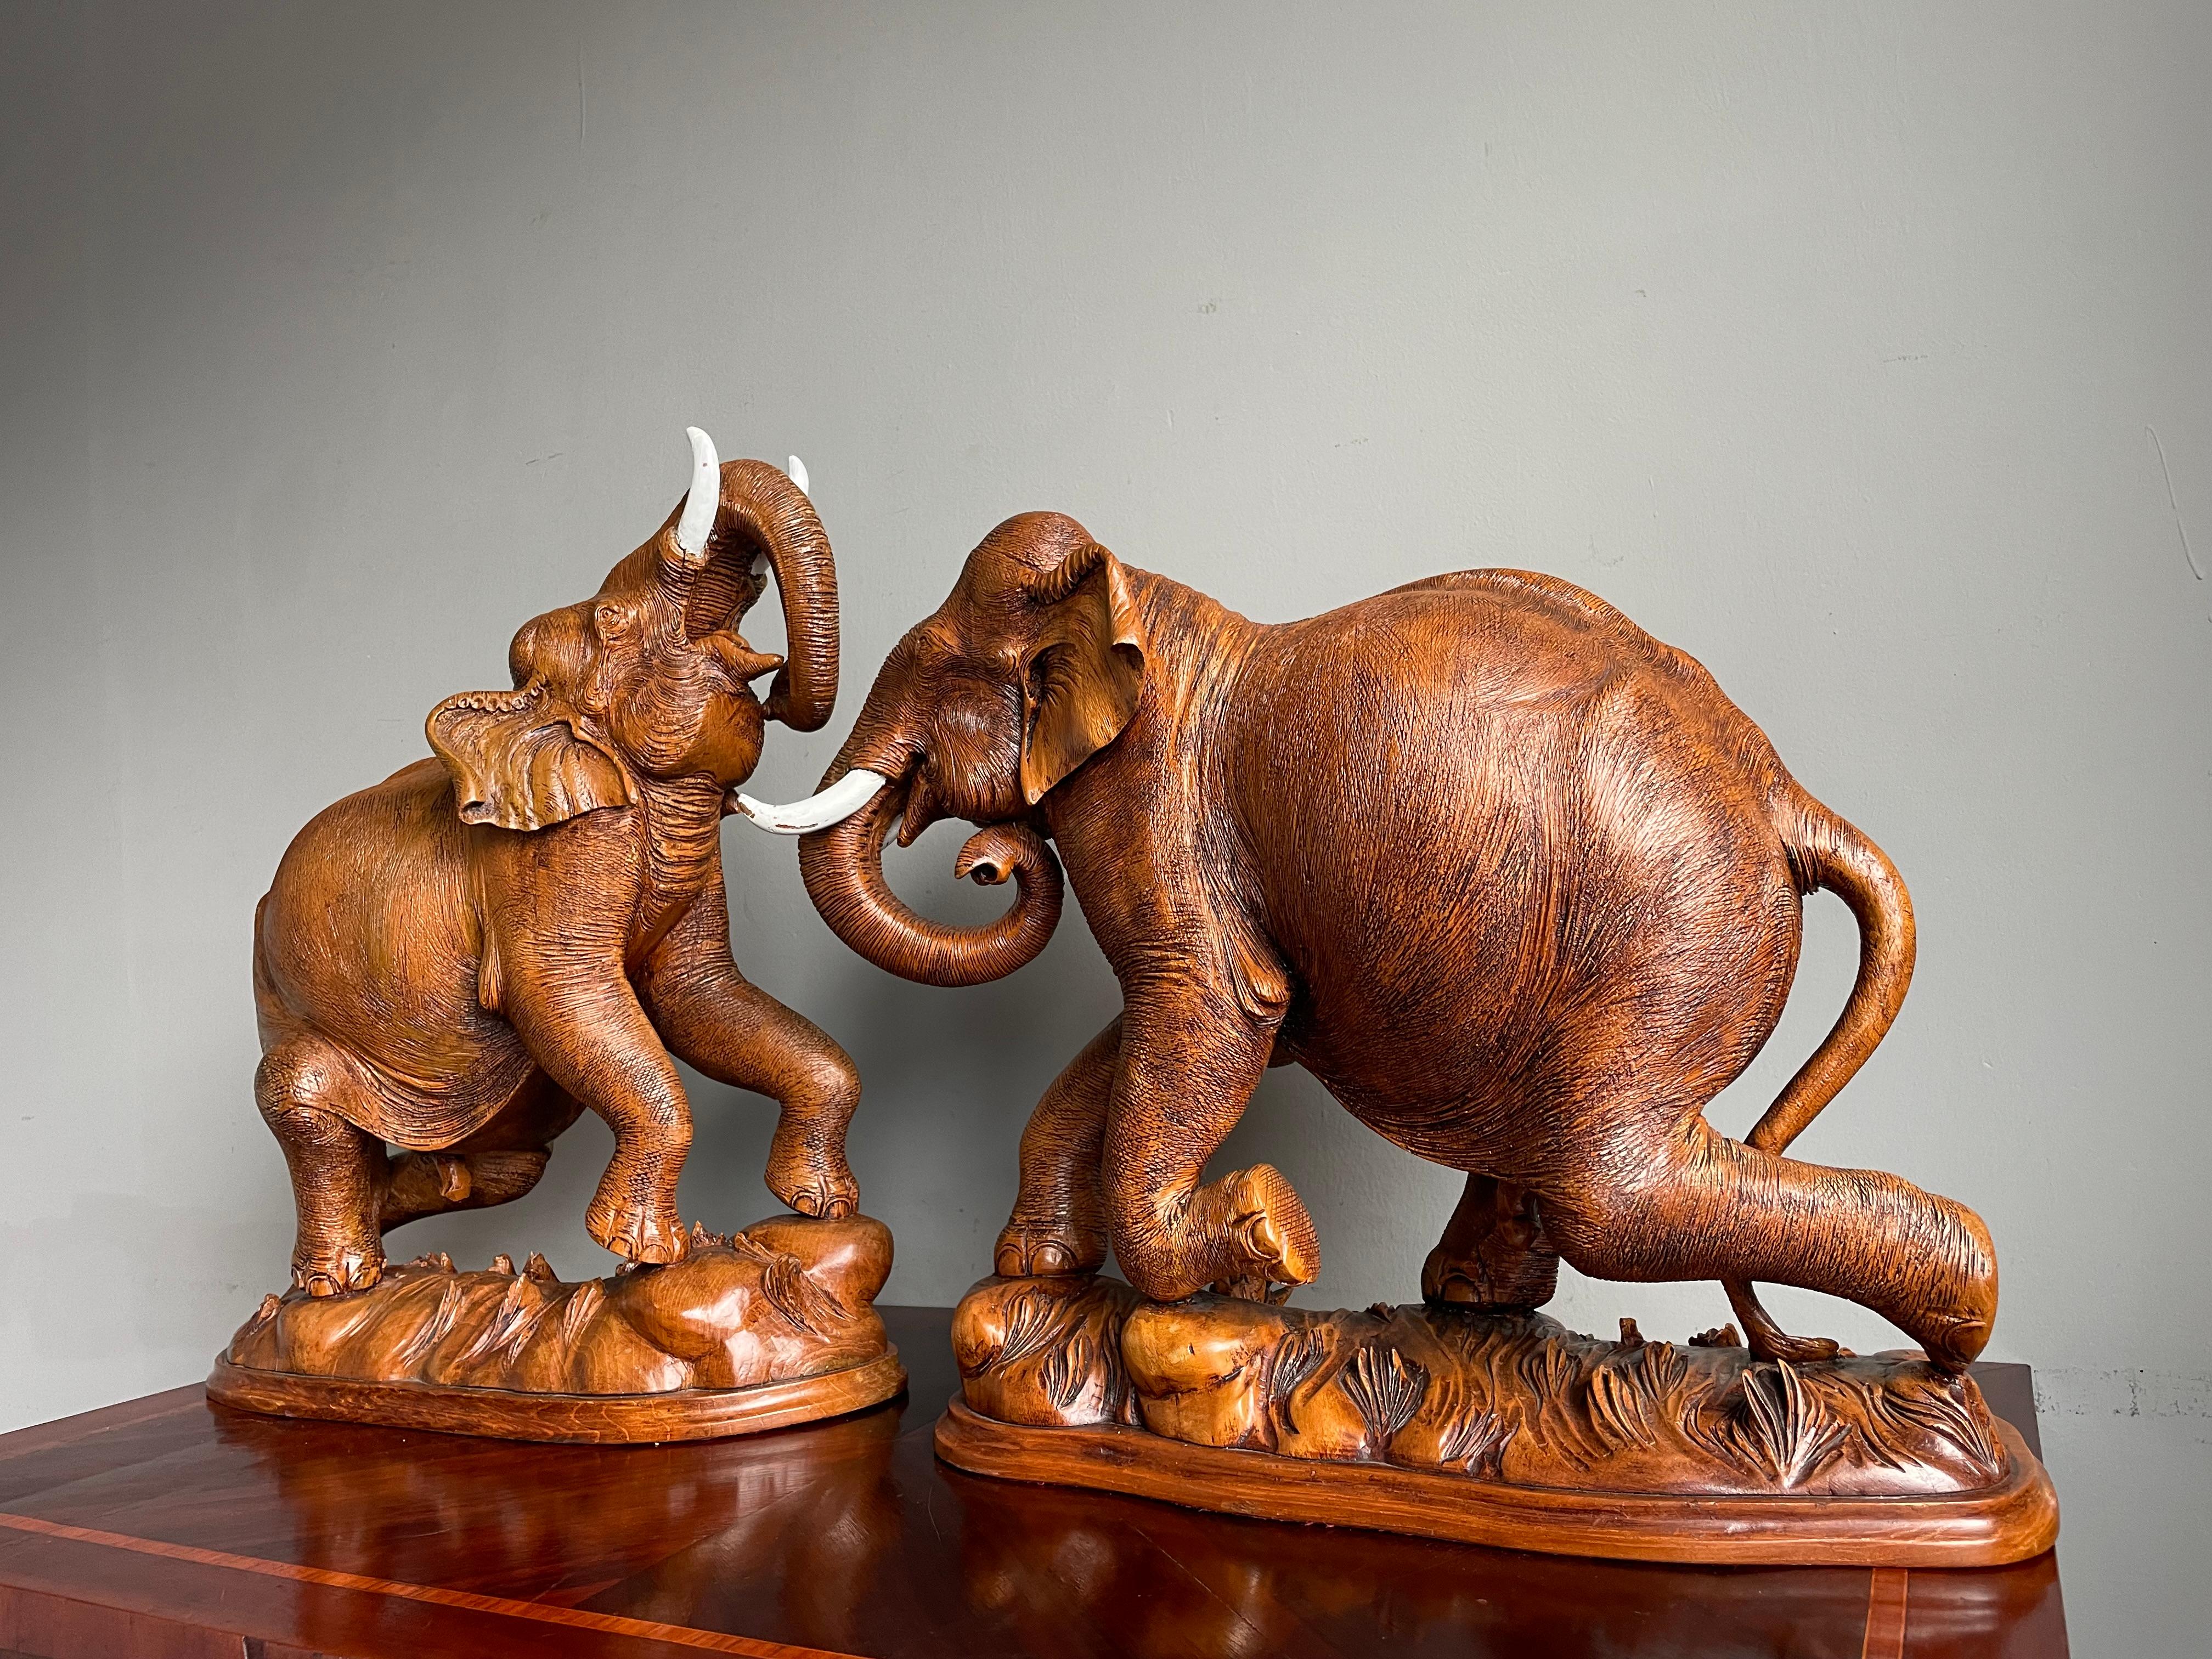 Good size and top quality carved wildlife sculptures.

On the internet and in certain countries in the world you can find many hand carved wooden elephants, but they are mostly of poor to very poor quality when it comes to the actual details. These